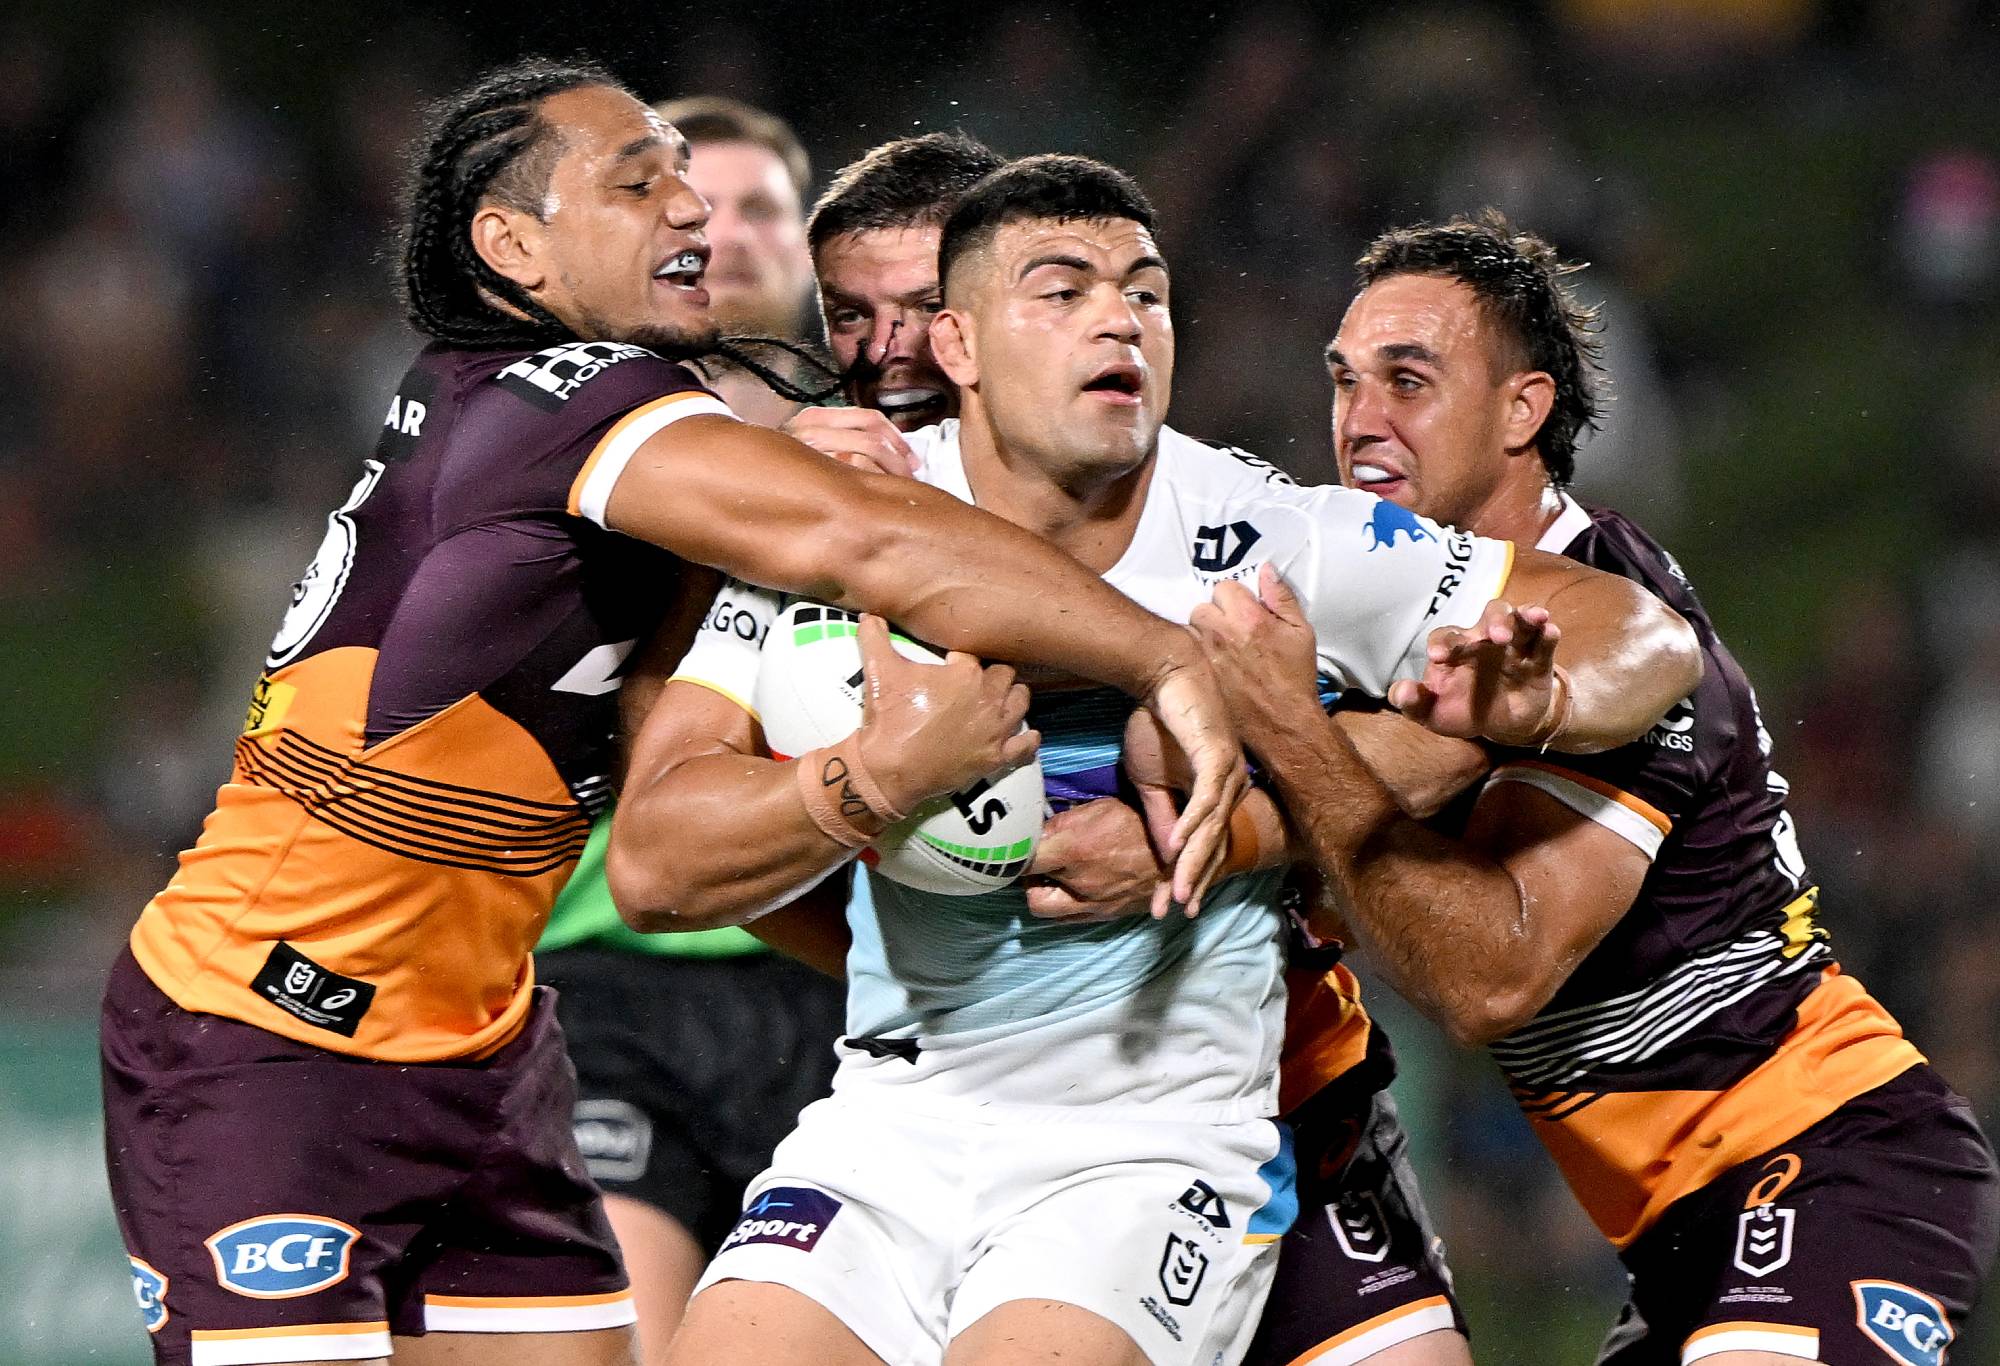 SUNSHINE COAST, AUSTRALIA - FEBRUARY 12: Titans' David Fifita is wrapped up by the defense during the NRL Test game between the Brisbane Broncos and Gold Coast Titans at Sunshine Coast Stadium on February 12, 2023 in Sunshine Coast, Australia. (Photo by Bradley Kanaris/Getty Images)